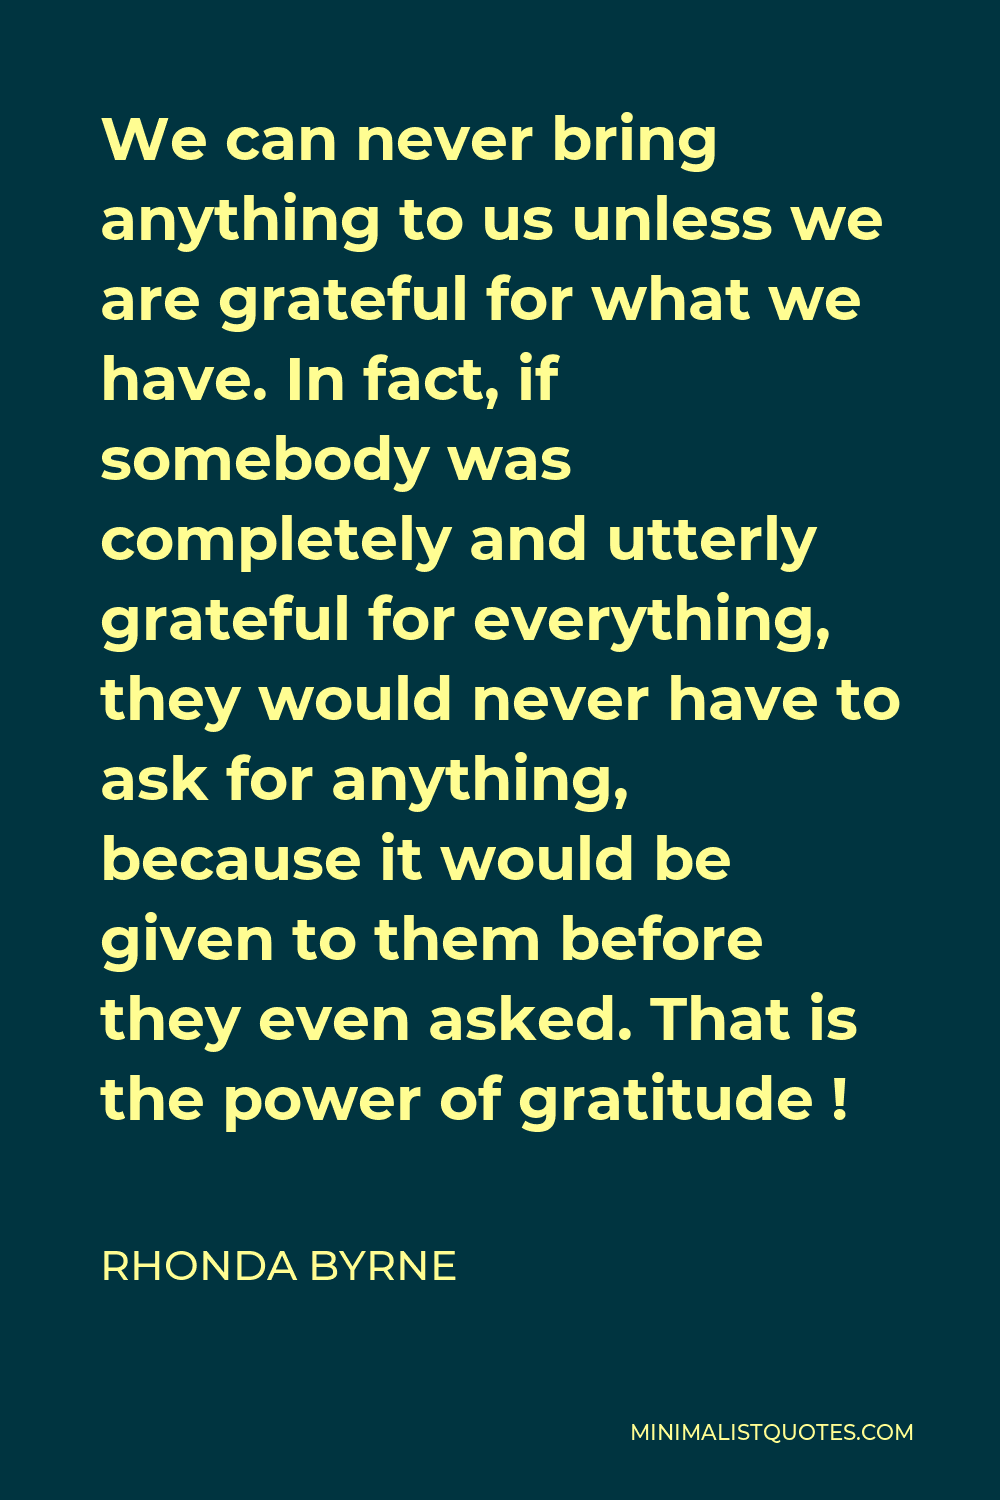 Rhonda Byrne Quote - We can never bring anything to us unless we are grateful for what we have. In fact, if somebody was completely and utterly grateful for everything, they would never have to ask for anything, because it would be given to them before they even asked. That is the power of gratitude !